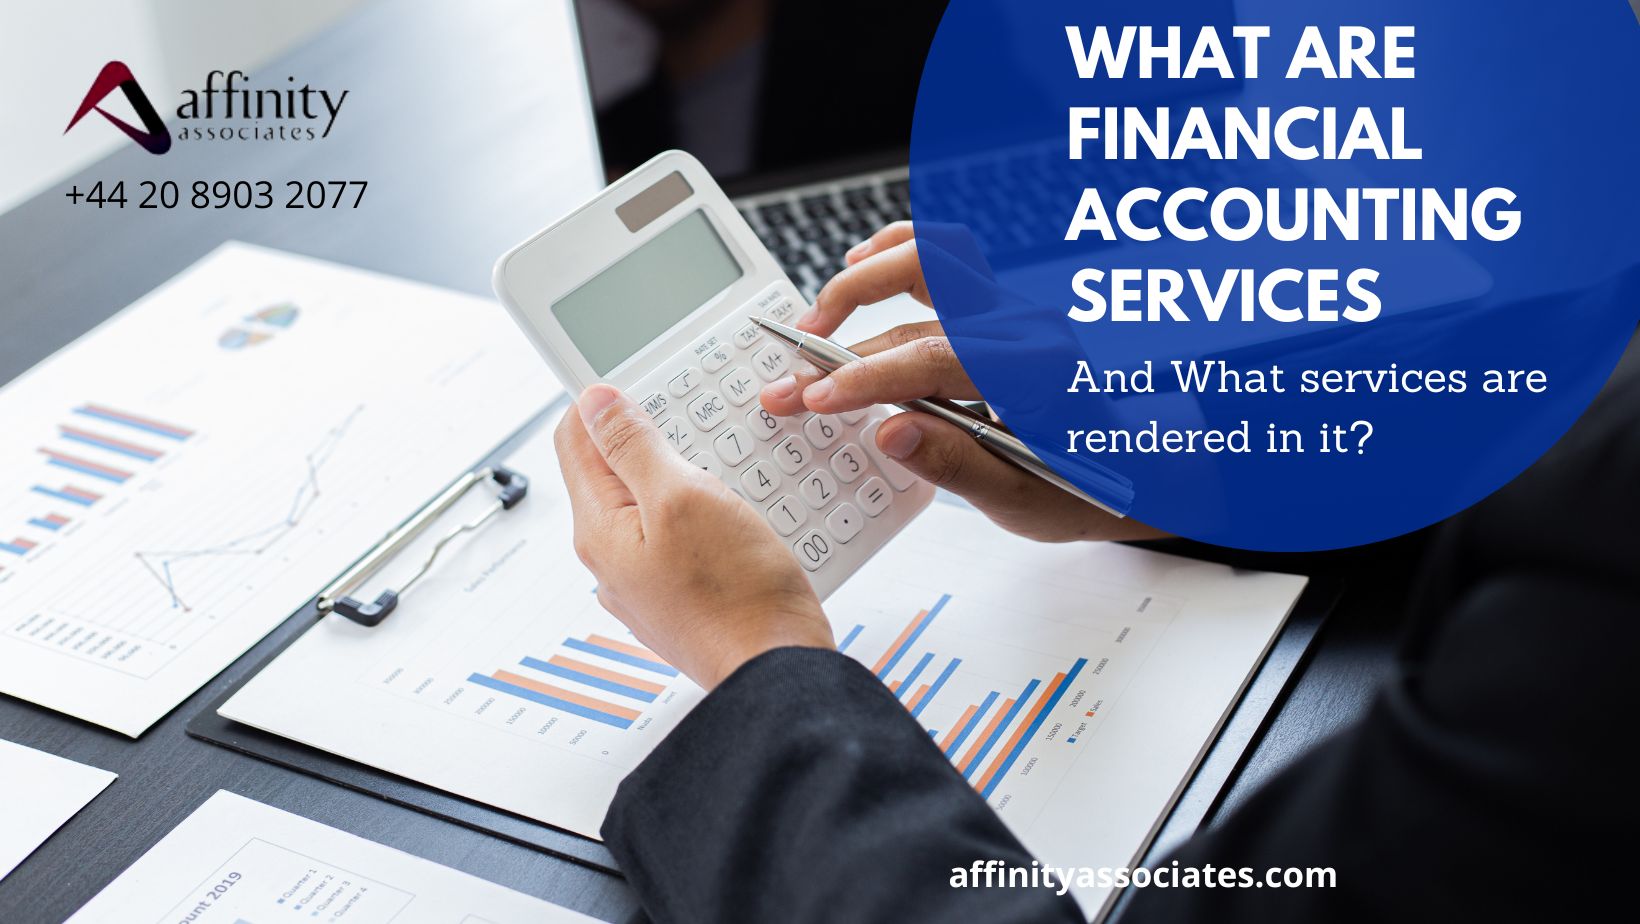 What are Financial Accounting Services and What services are rendered in it?